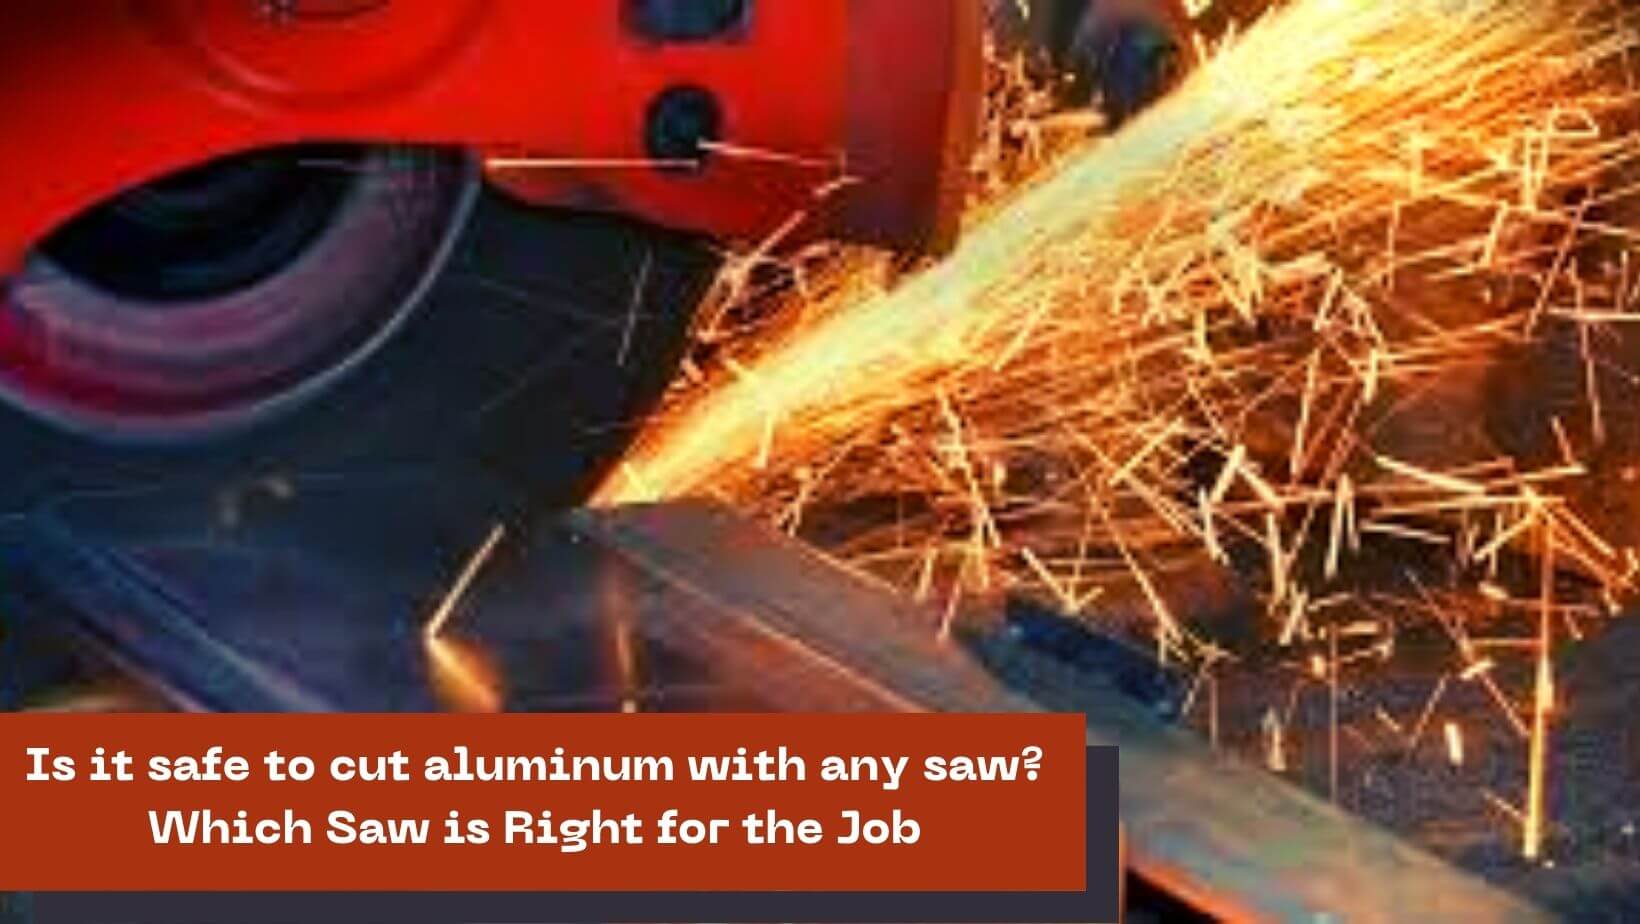 Is it safe to cut aluminum with any saw?